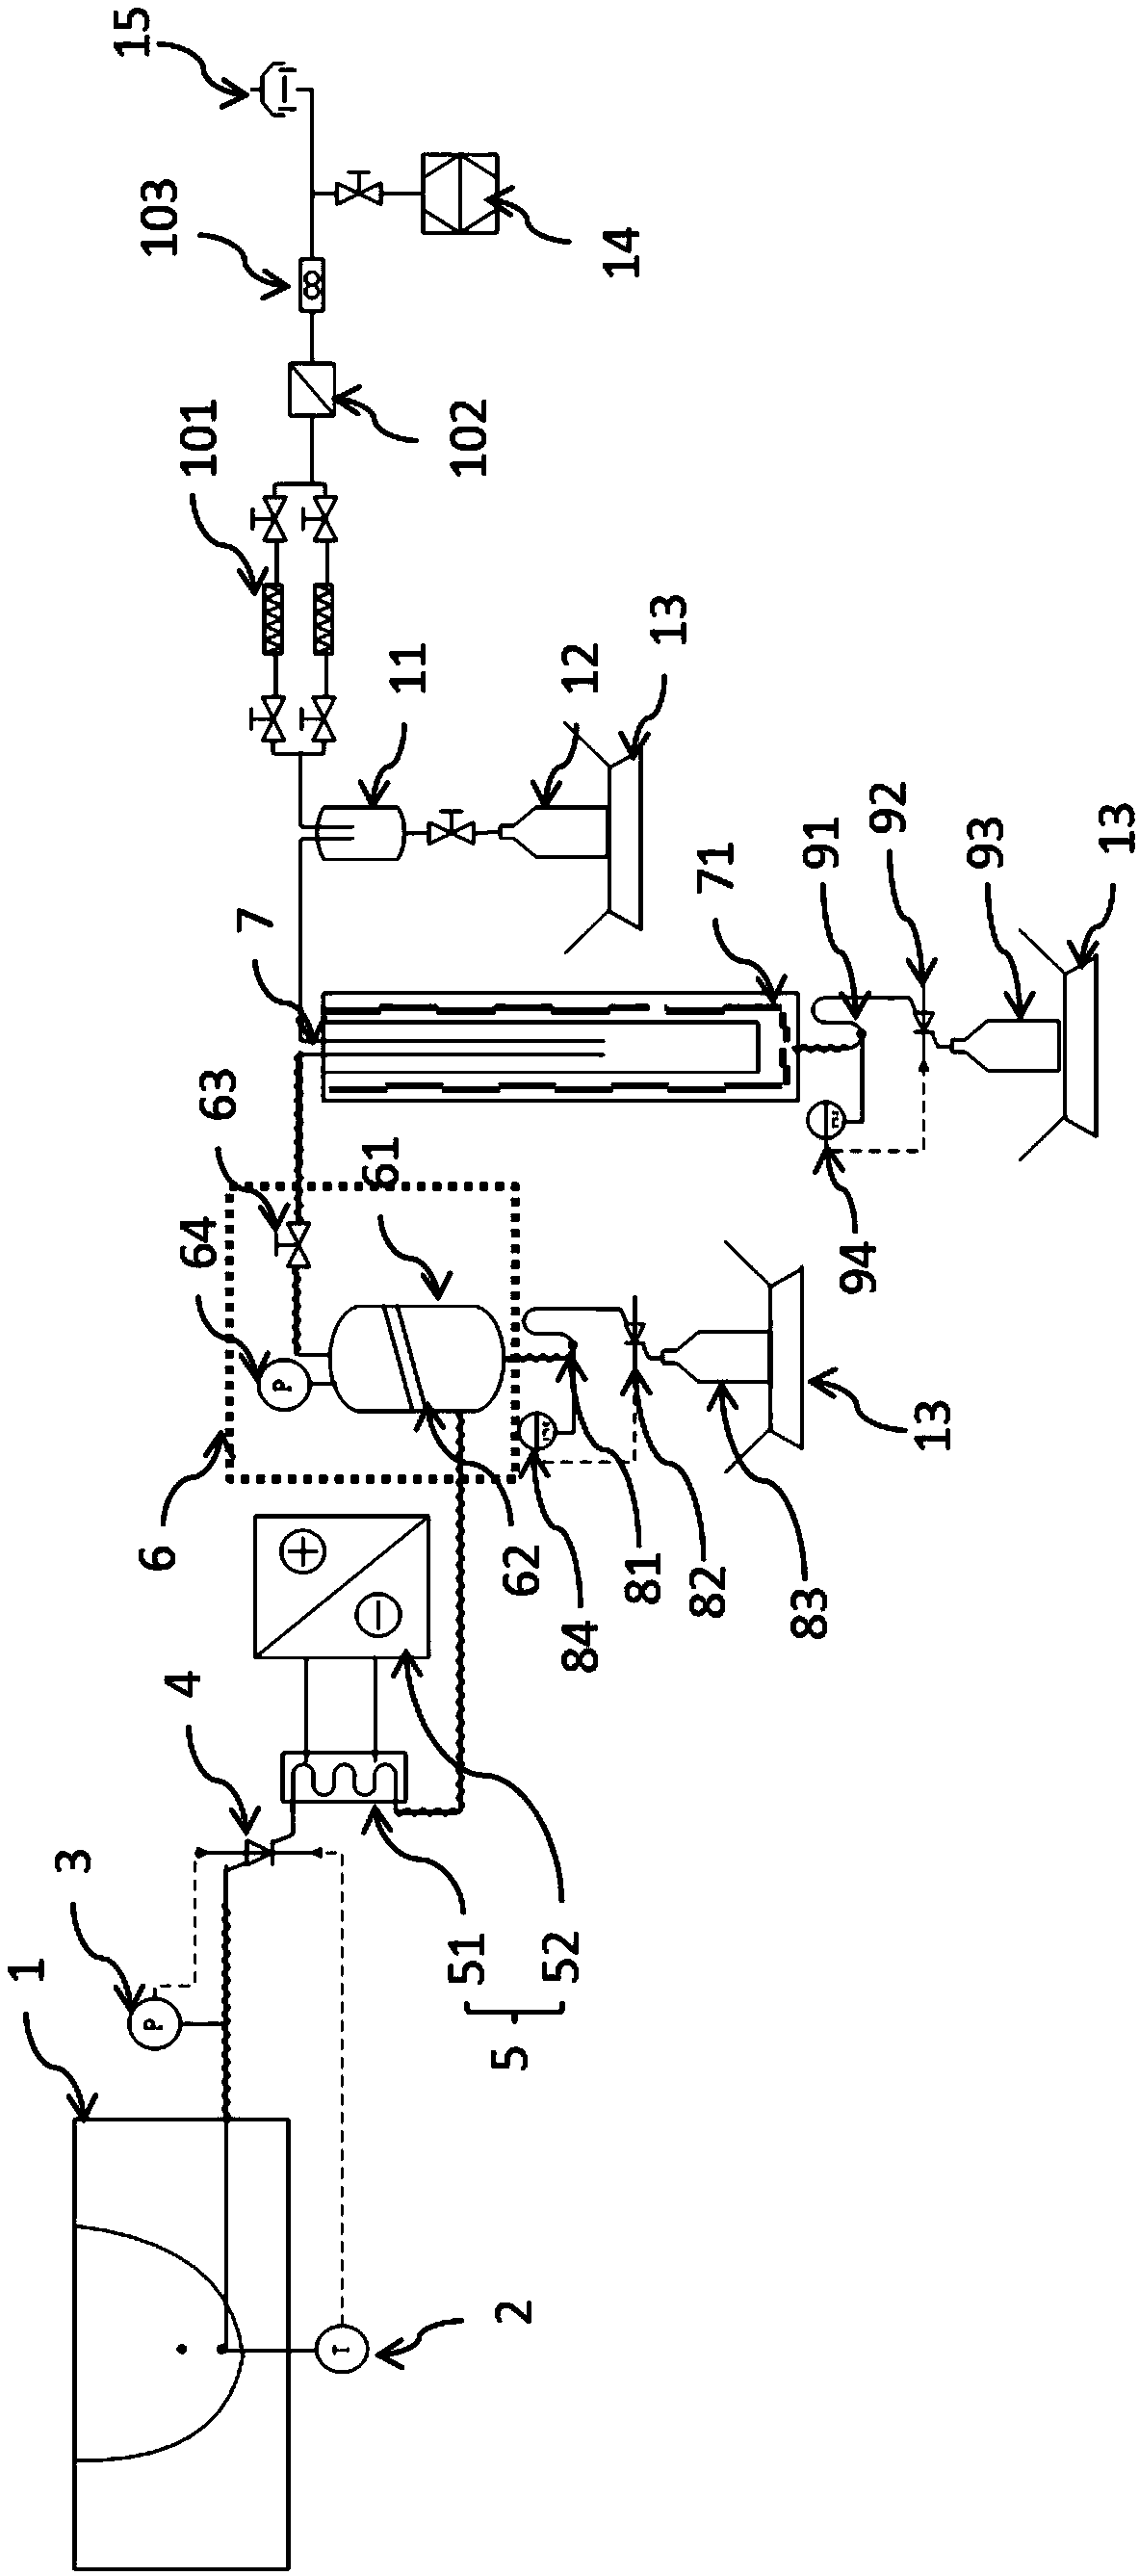 Oil-water-gas production control and metering device and method in heavy oil exploitation experiment